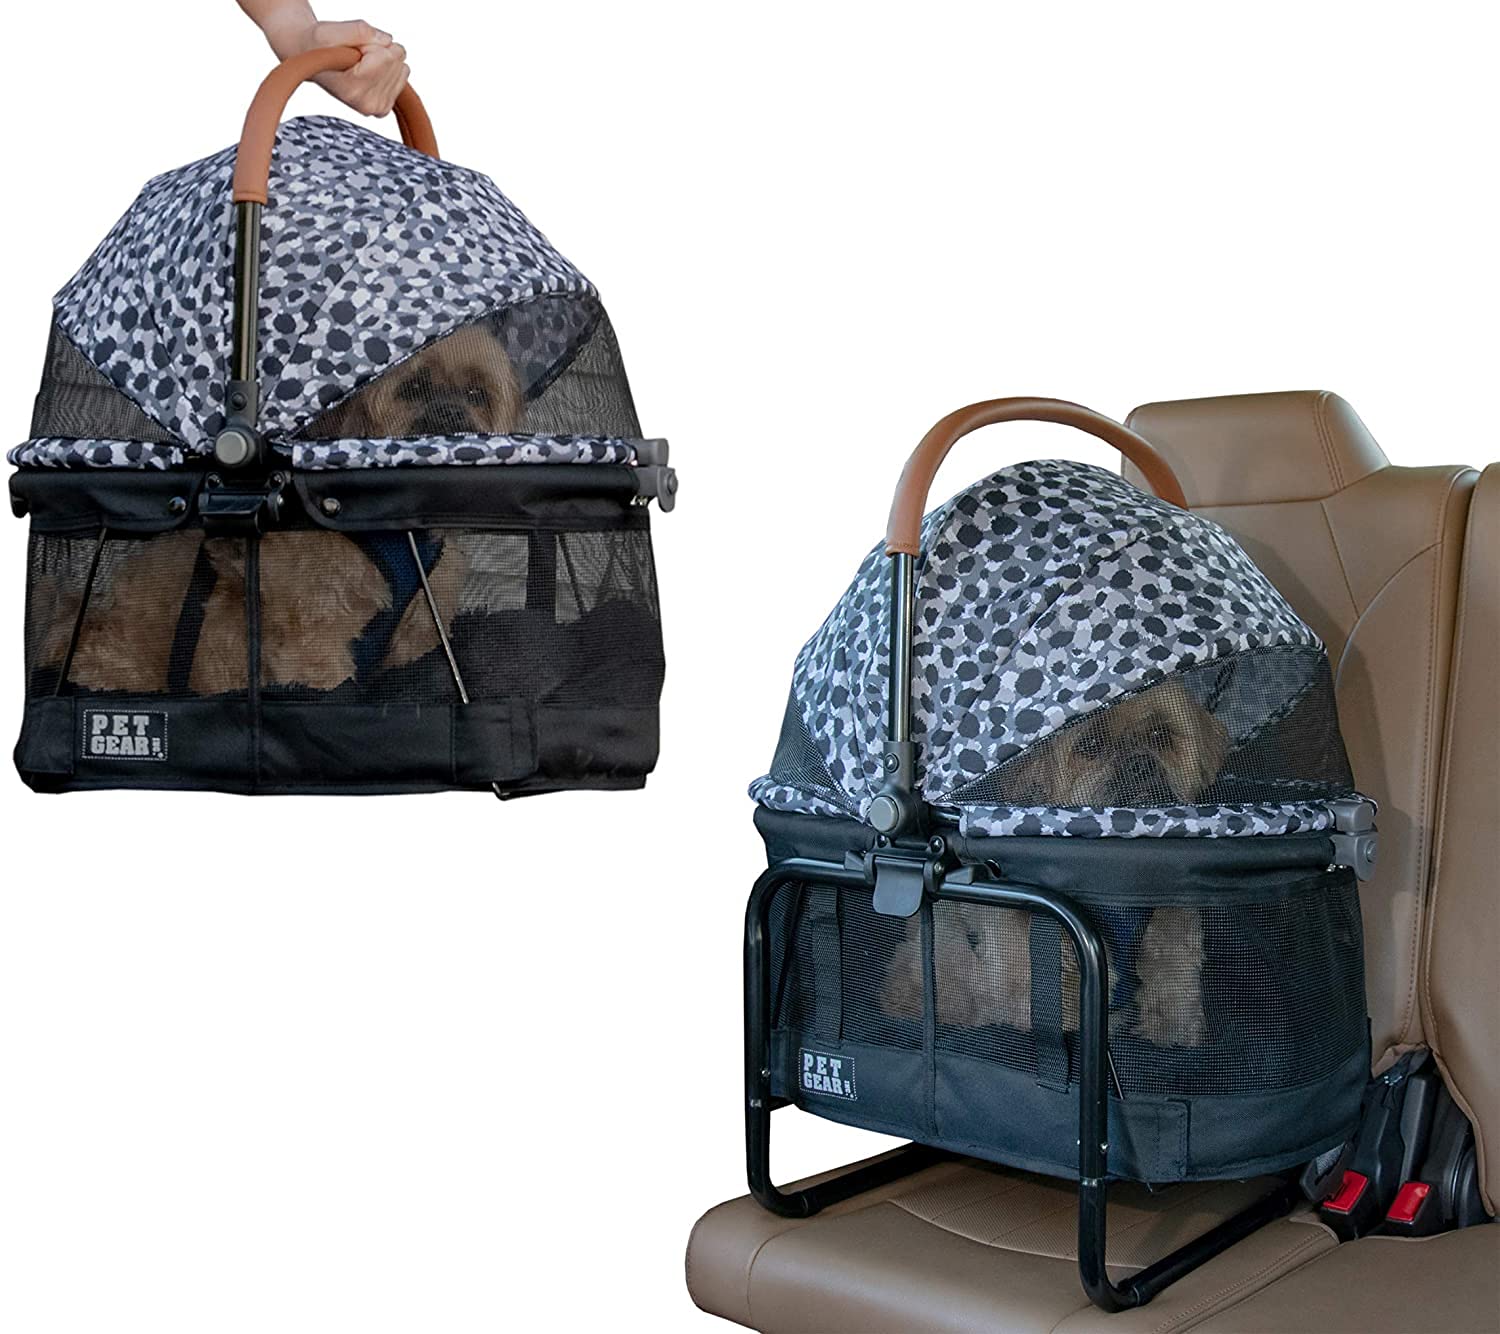 Pet Gear View 360 Pet Carrier & Car Seat With Booster Seat Frame For Small Dogs & Cats, Mesh Ventilation, Push Button Entry, No 